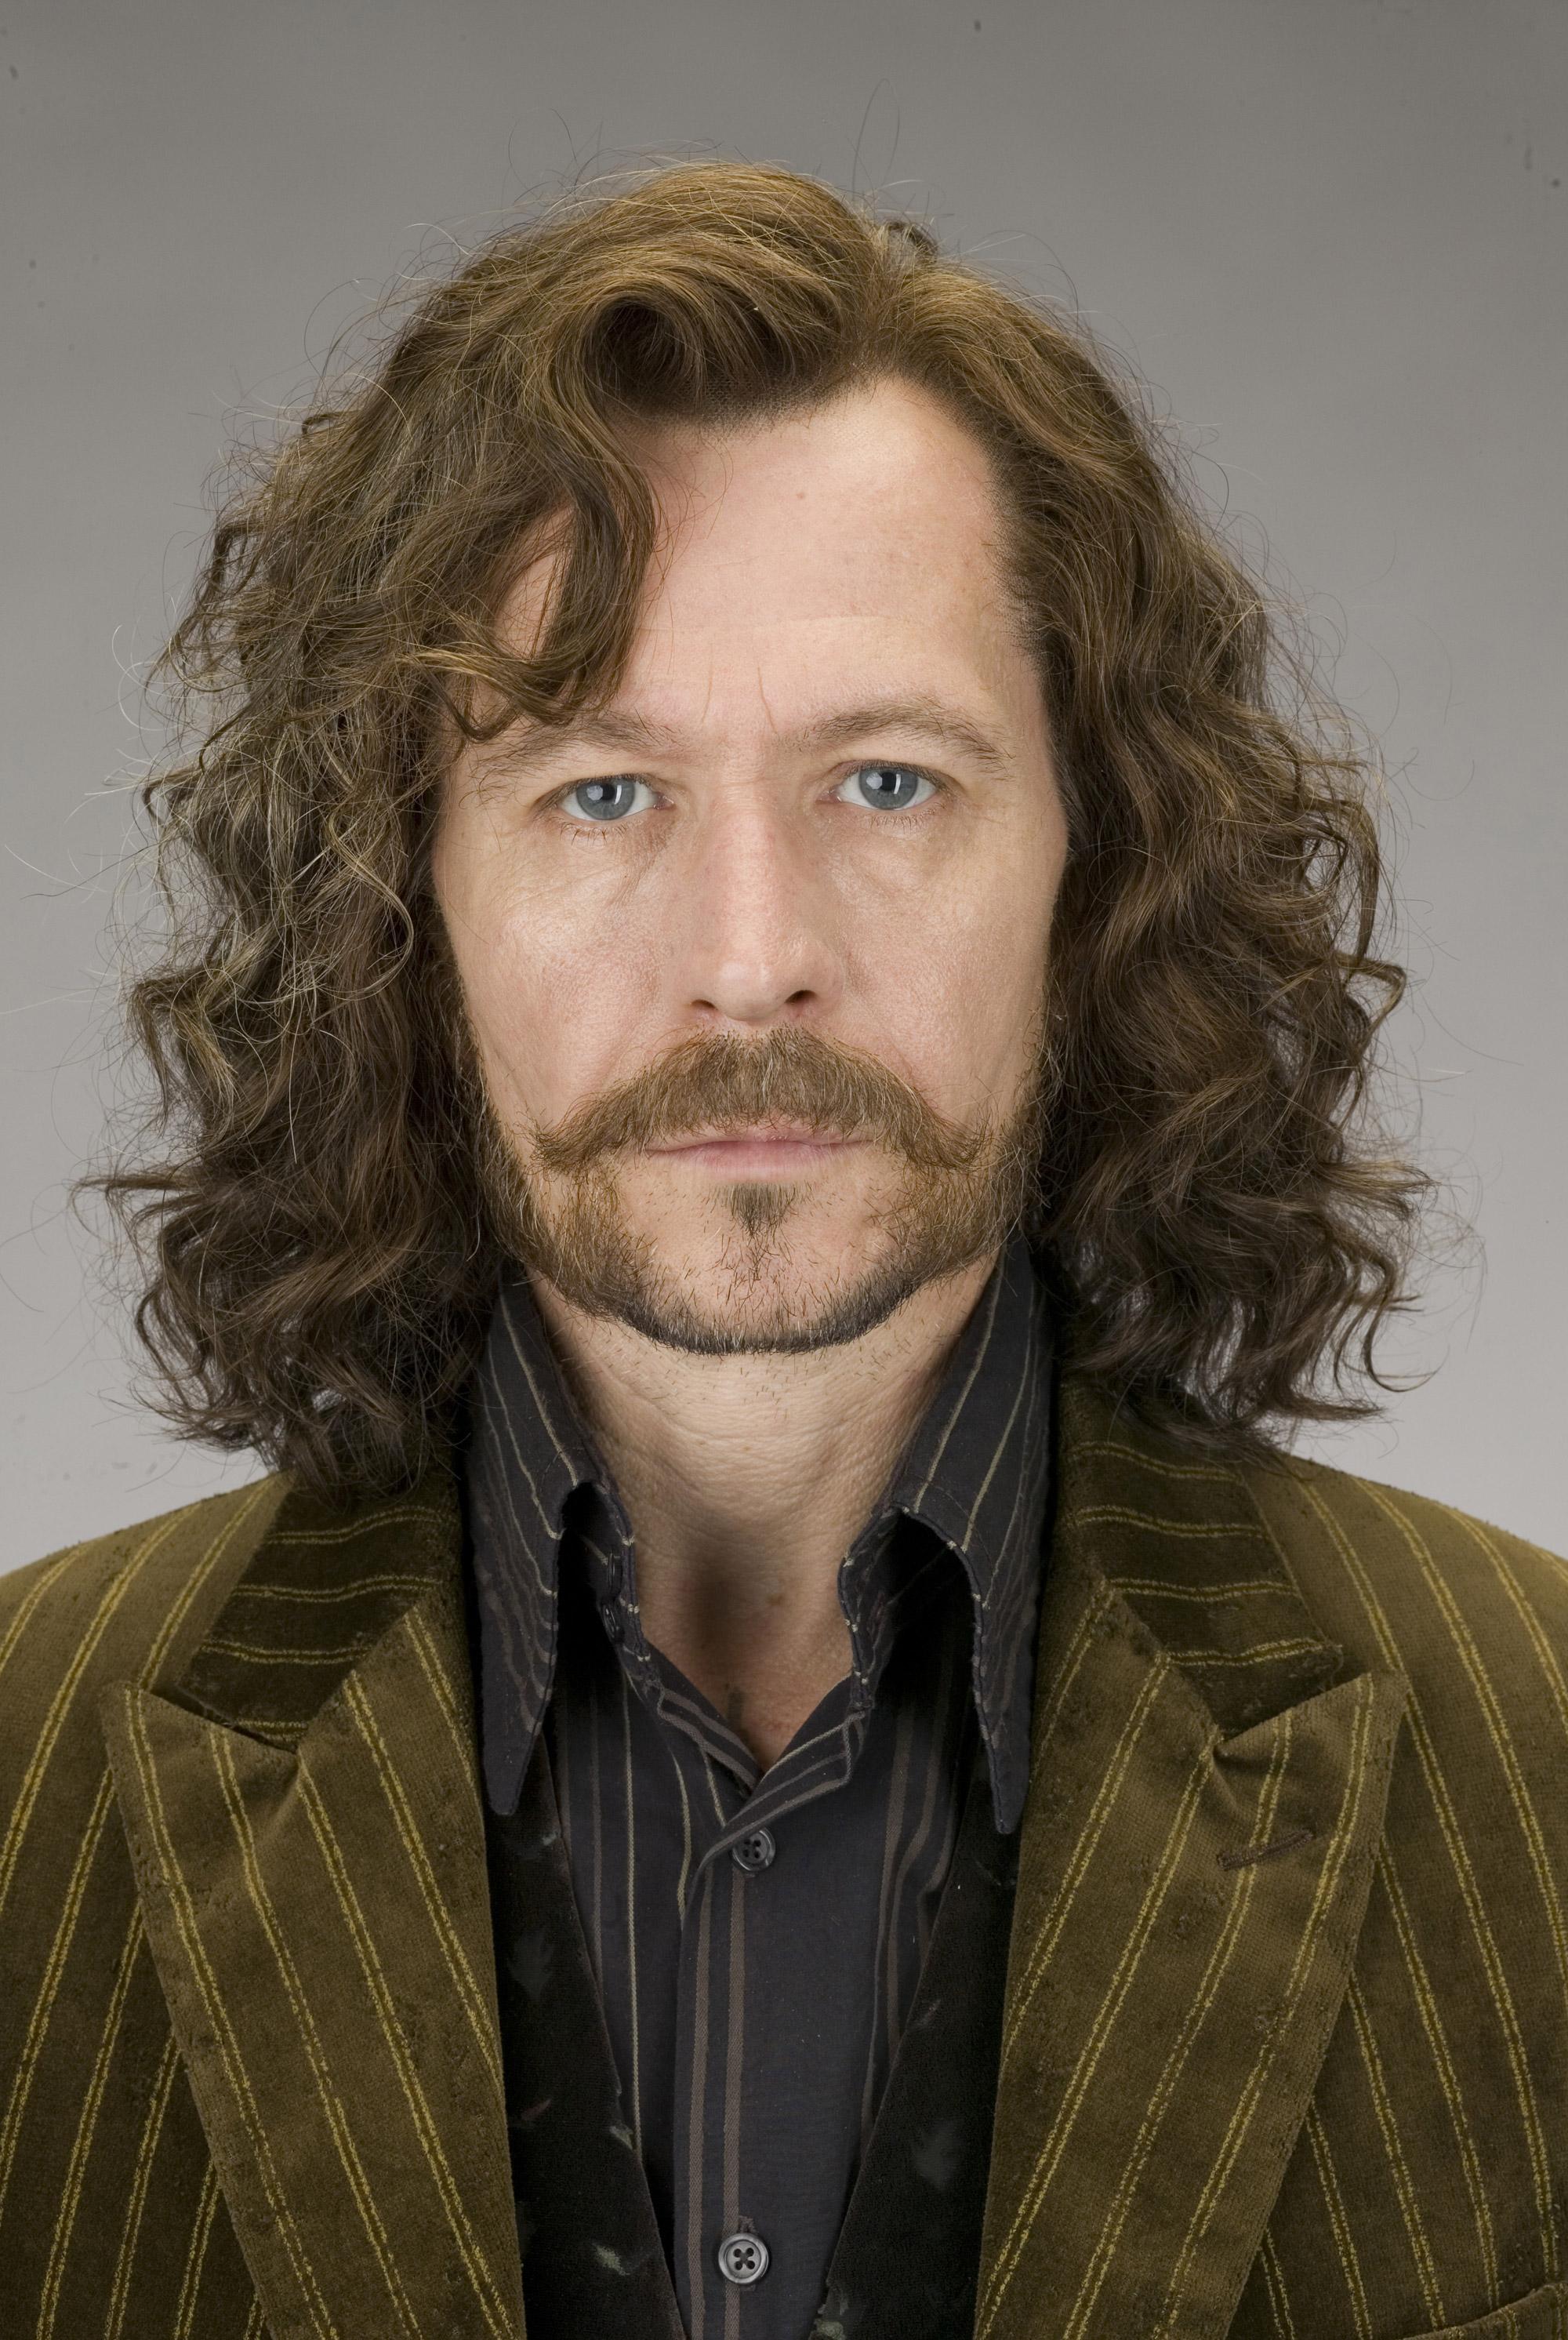 who plays sirius black in harry potter , how many dark arts teachers in harry potter